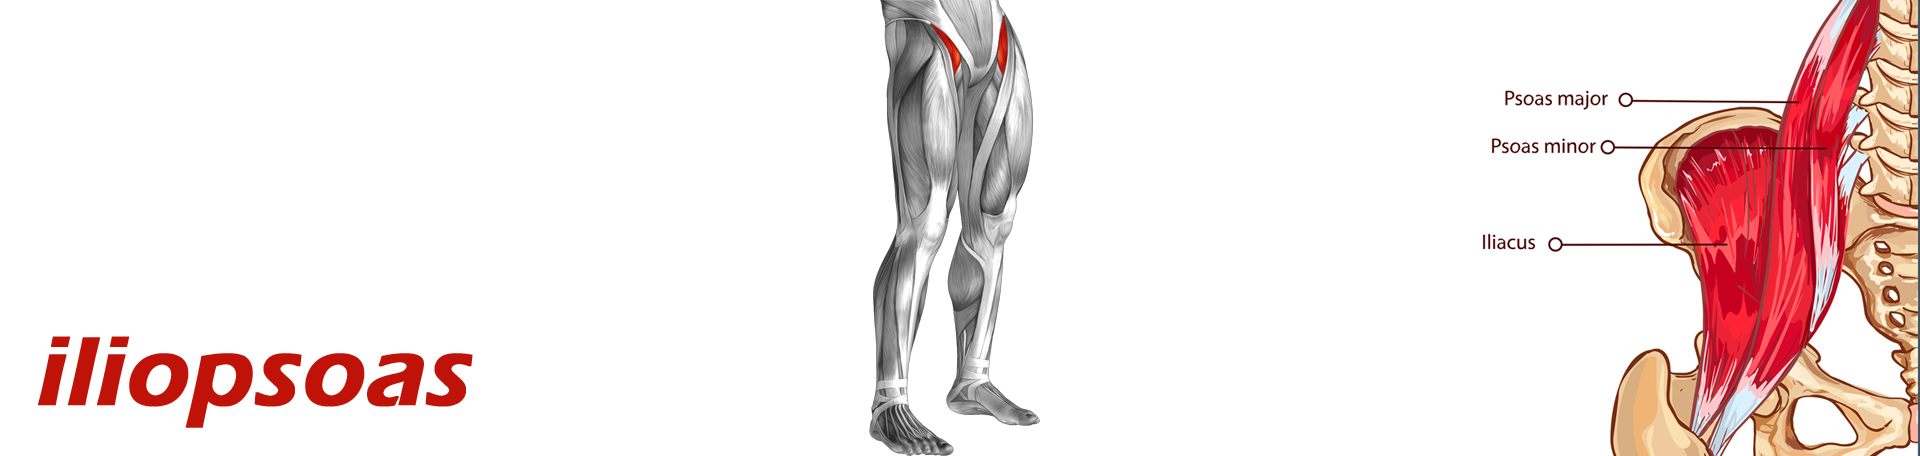 Georgetown Back Pain and Iliopsoas Muscle Link